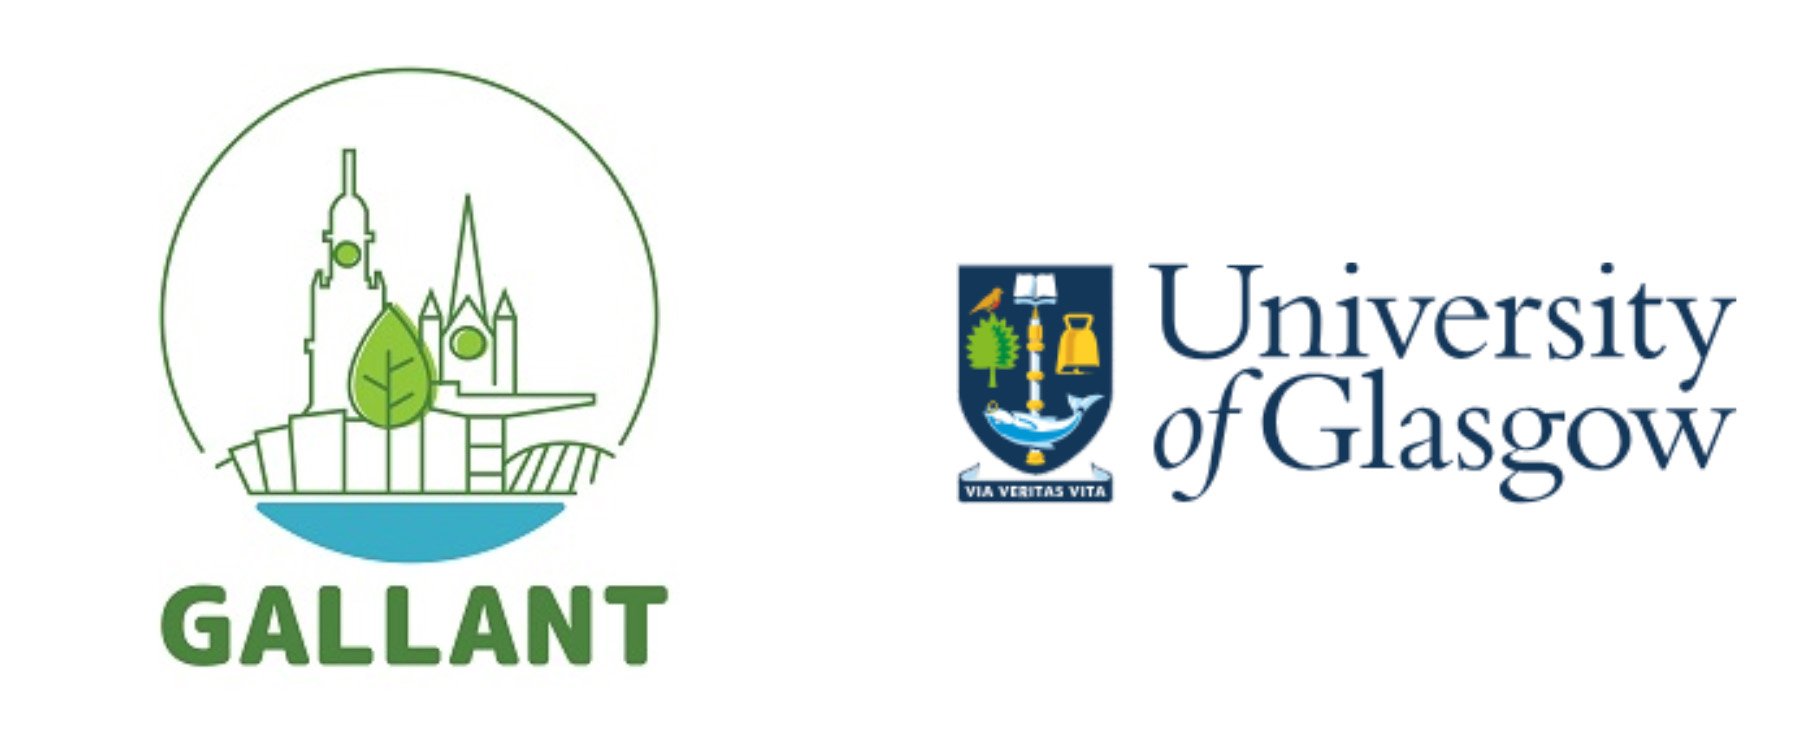 Logos for GALLANT and University of Glasgow